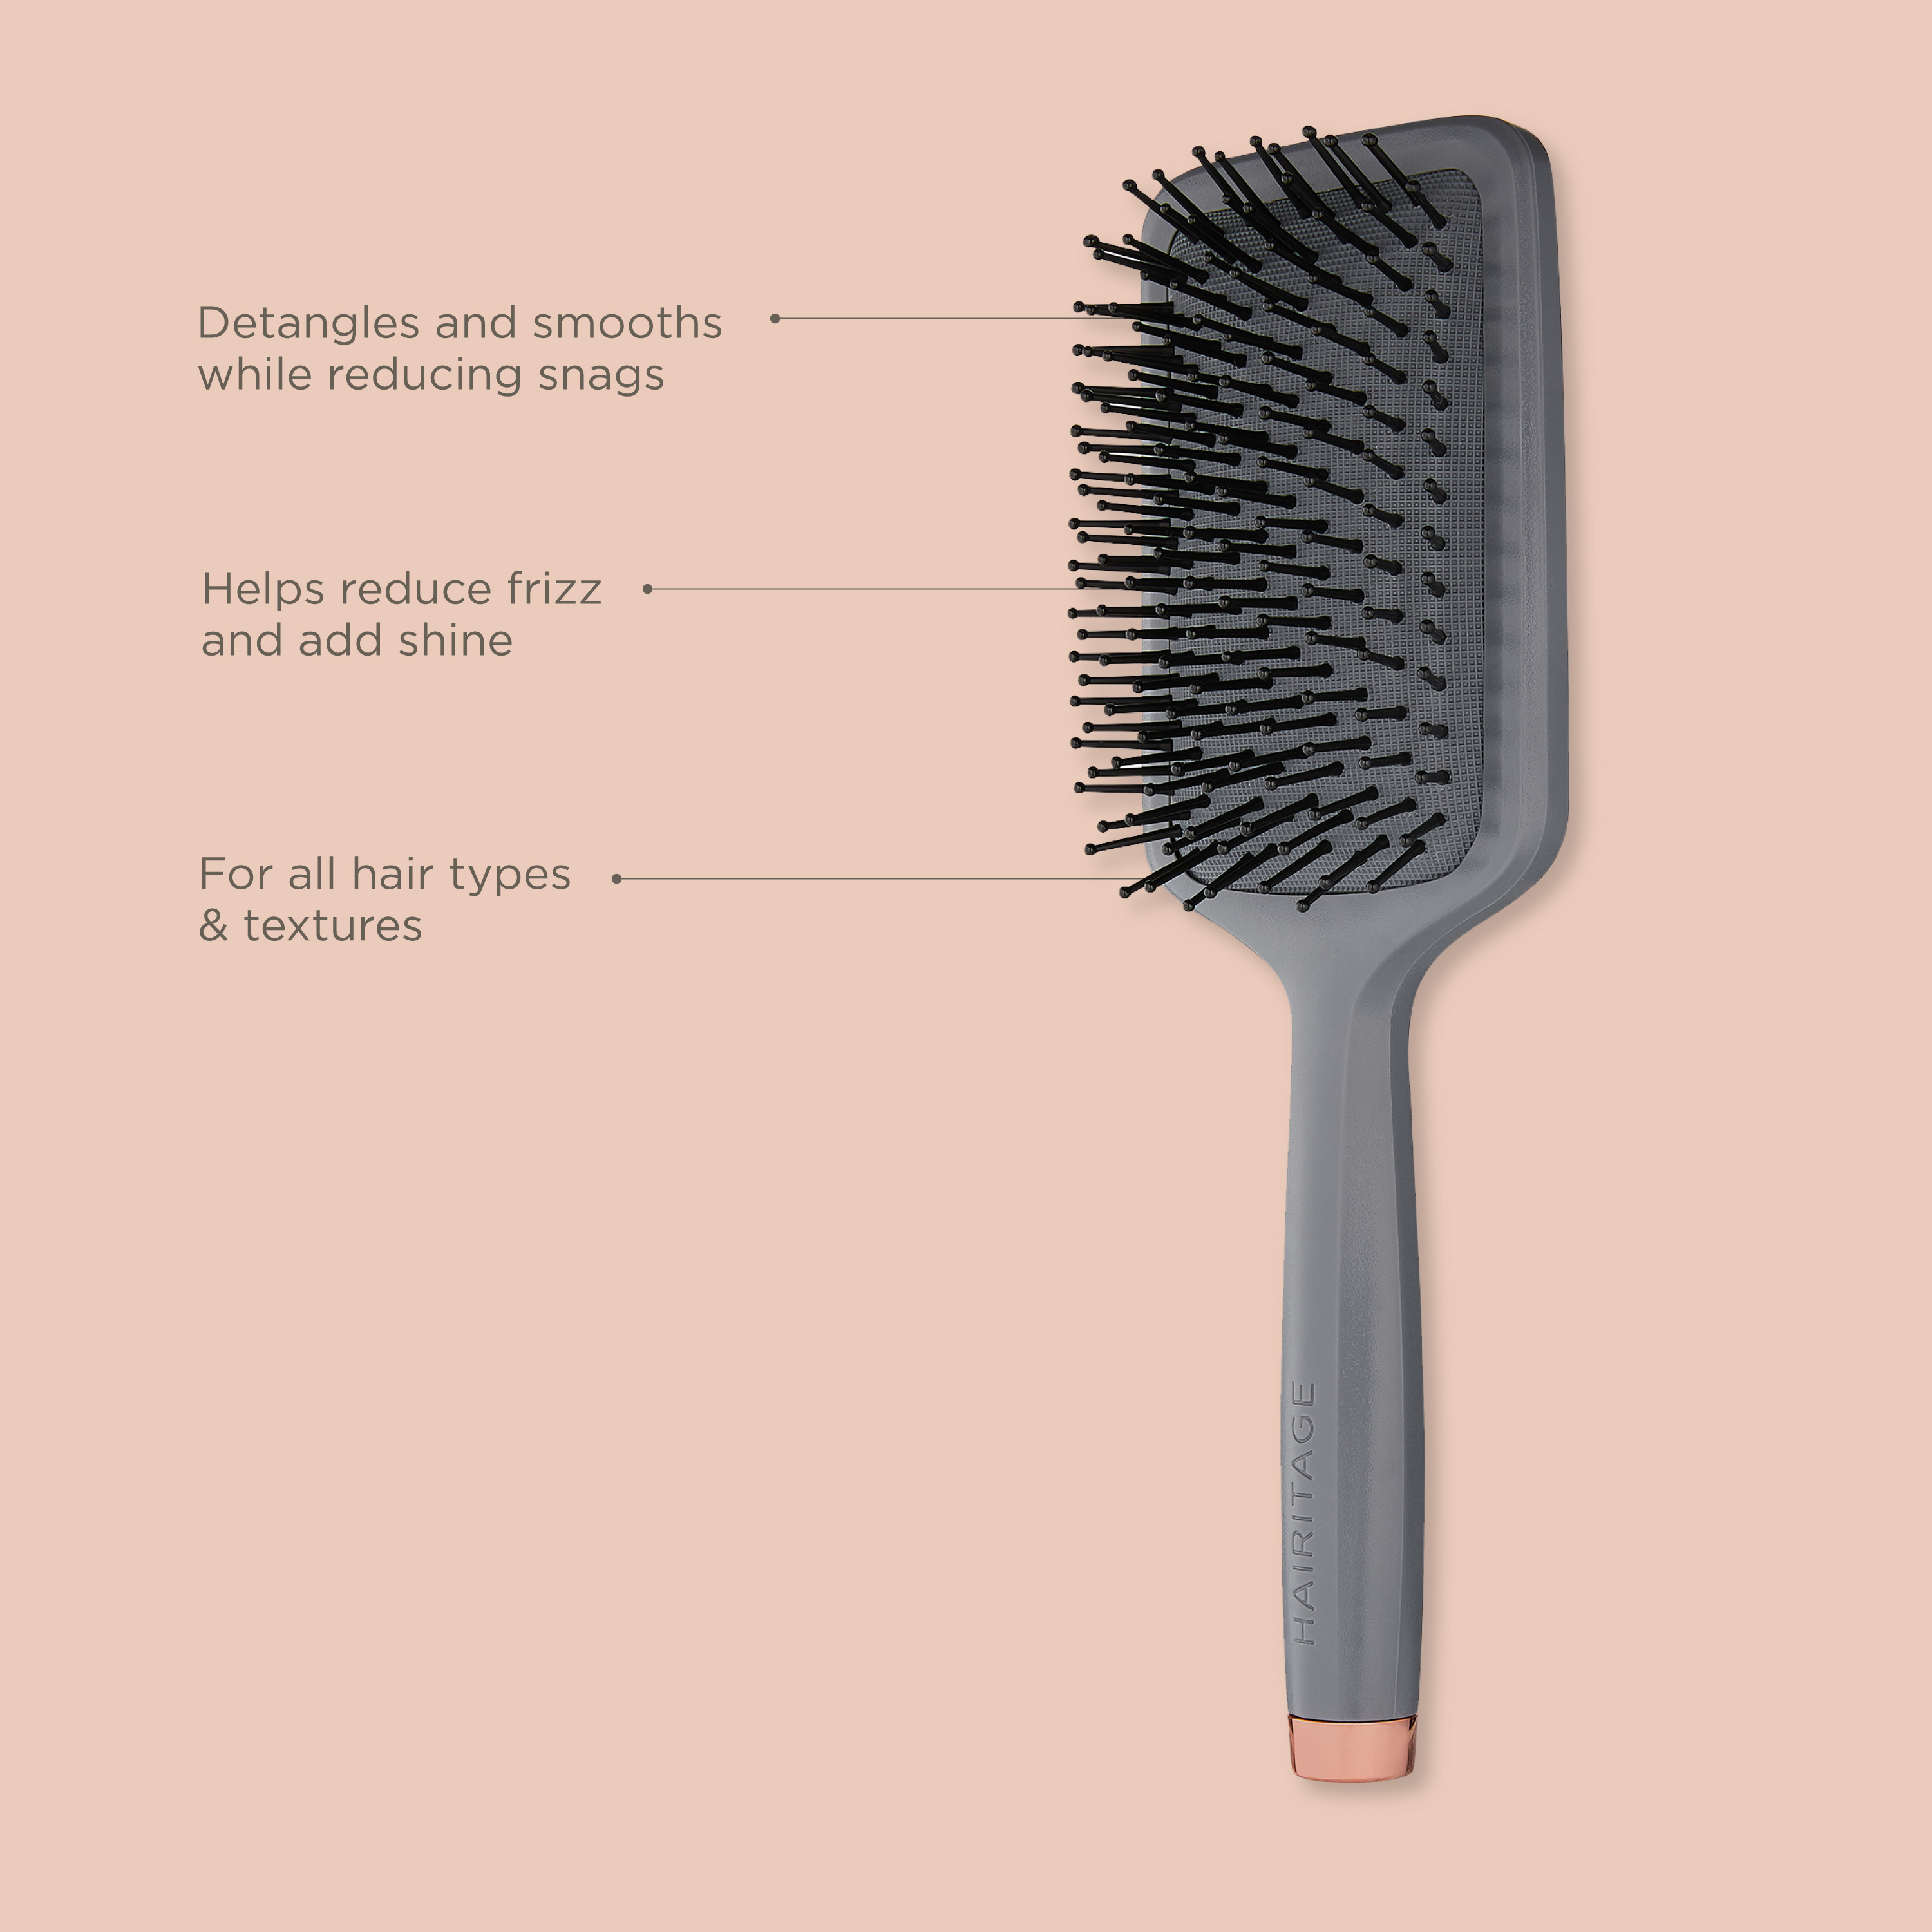 Hairitage Brush It Off Detangling & Smoothing Paddle Hair Brush for Women | Anti Frizz | for Wet & Dry Hair, 1 PC - image 6 of 12